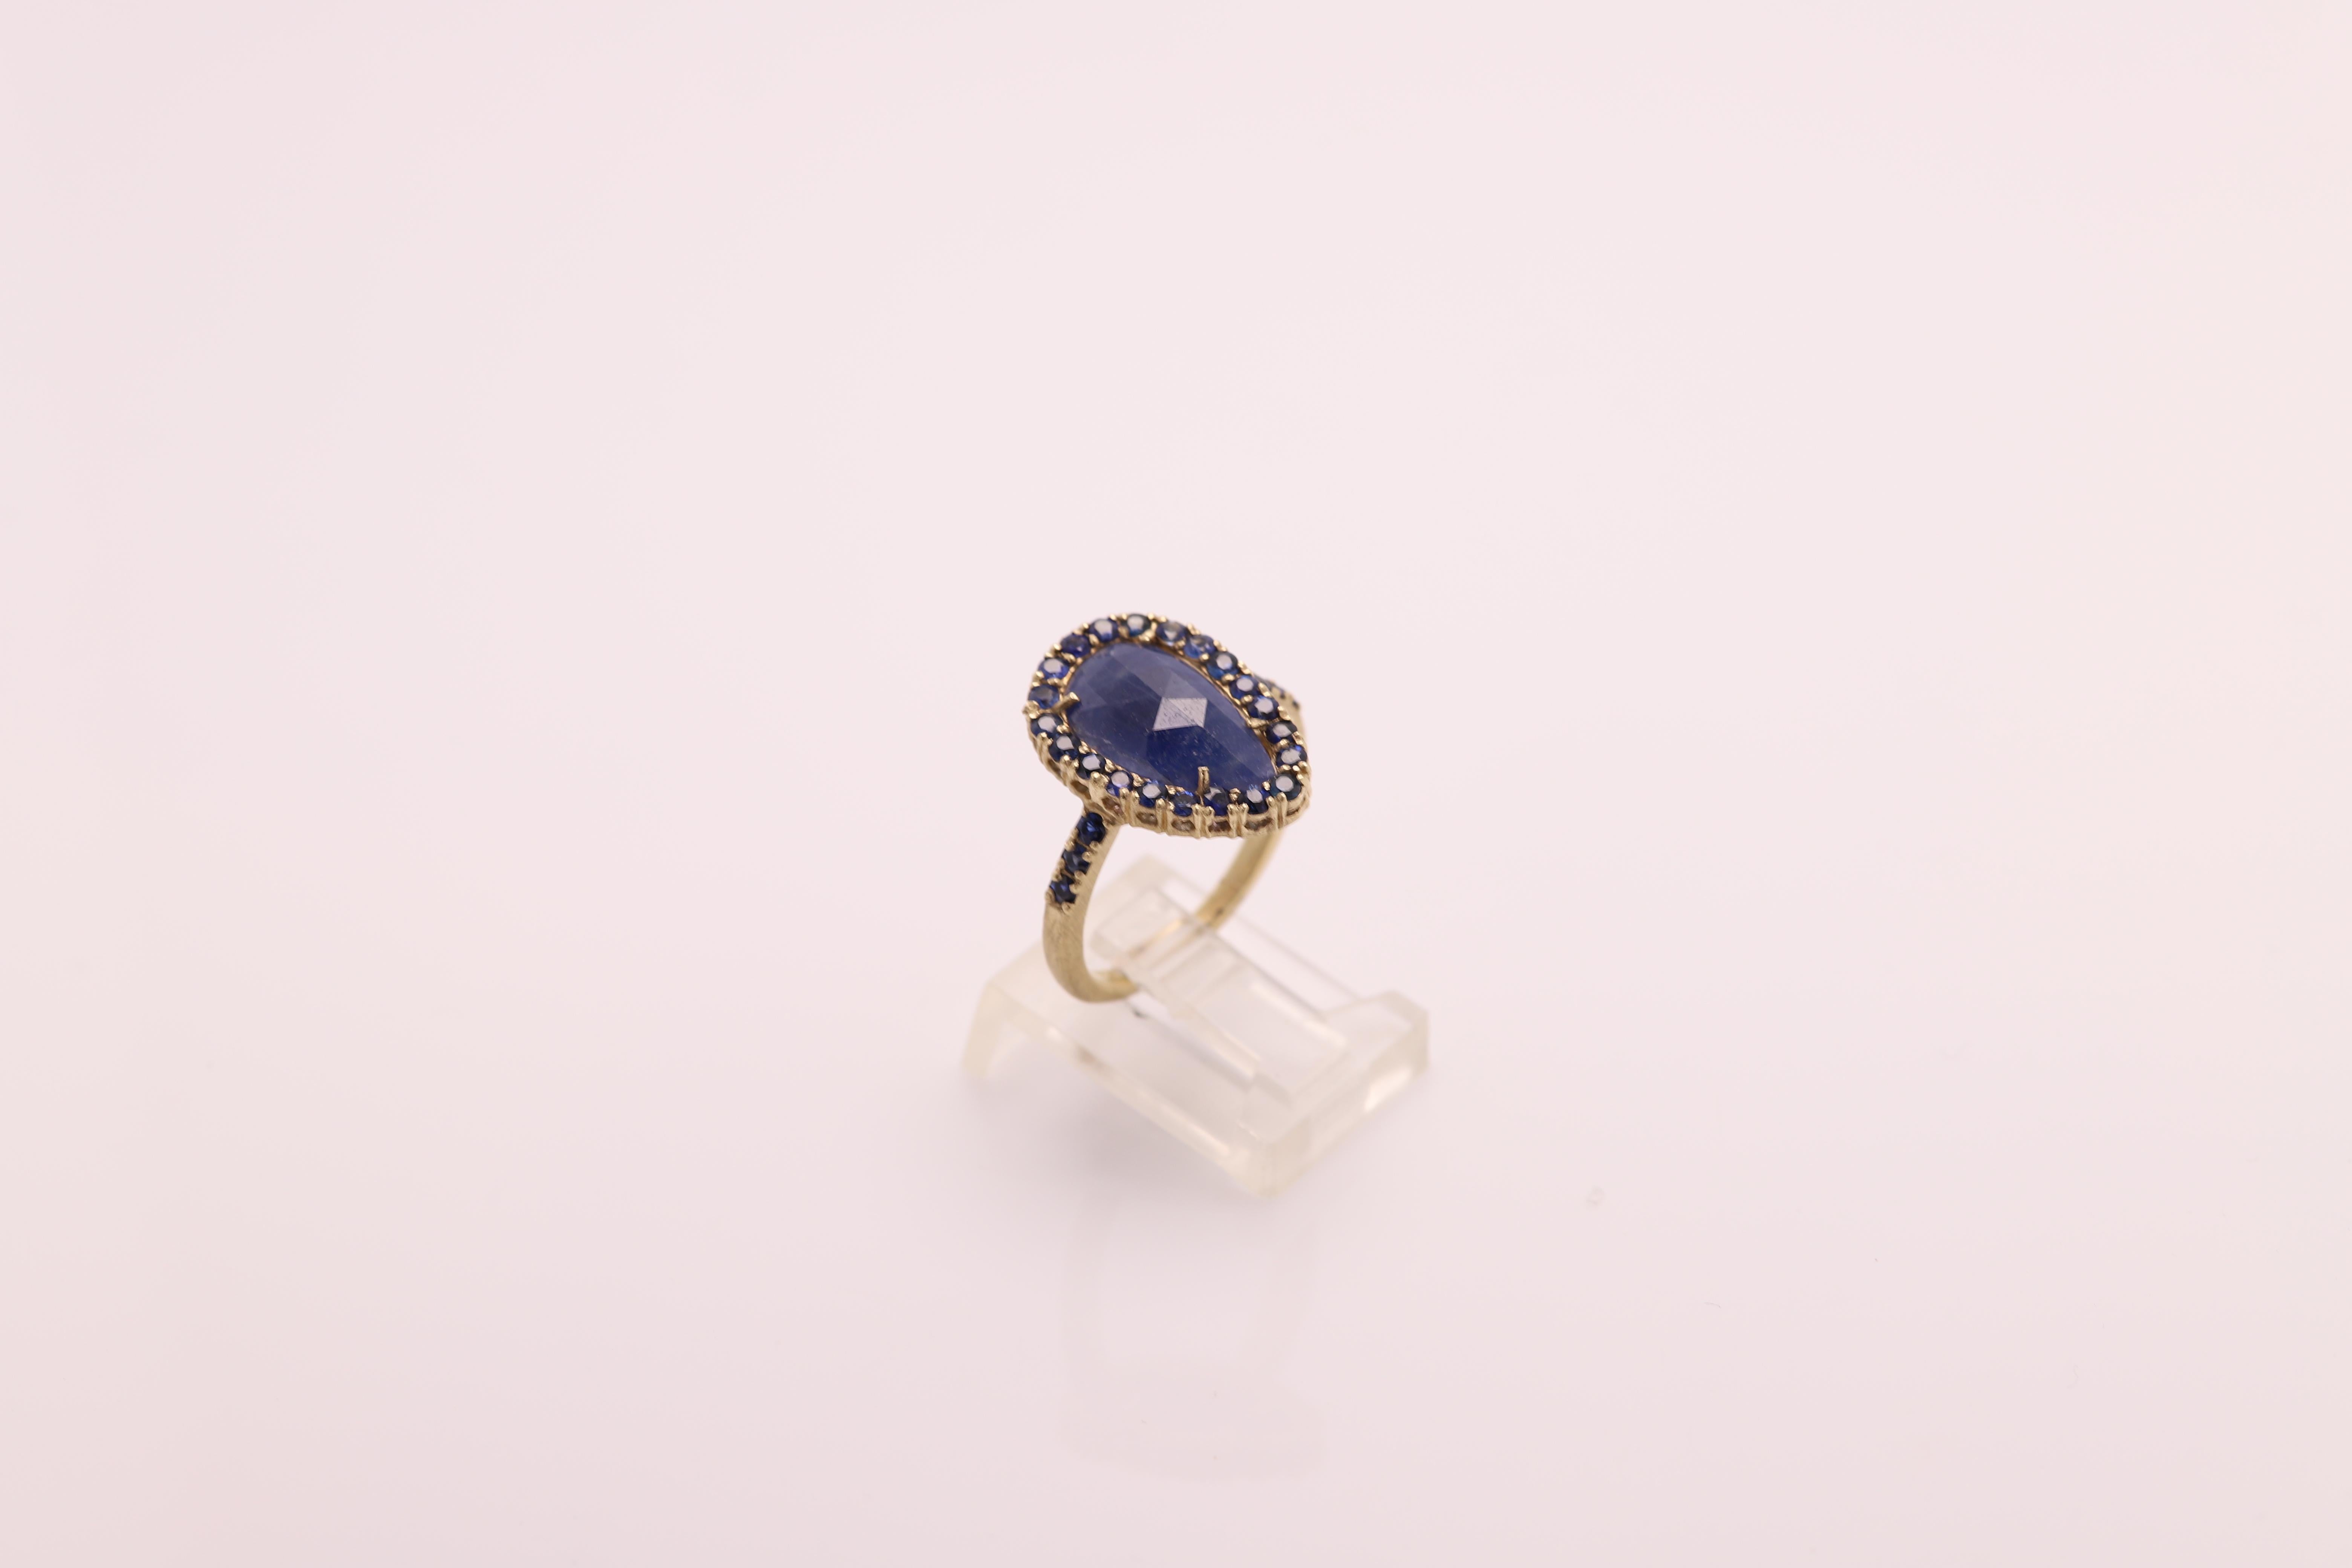 Vintage Blue Sapphire Ring - Hand Made in Italy
14k Yellow Gold 4.5 grams - mat finish (not shiny)
Small Round Sapphires around the center.
Center is a 